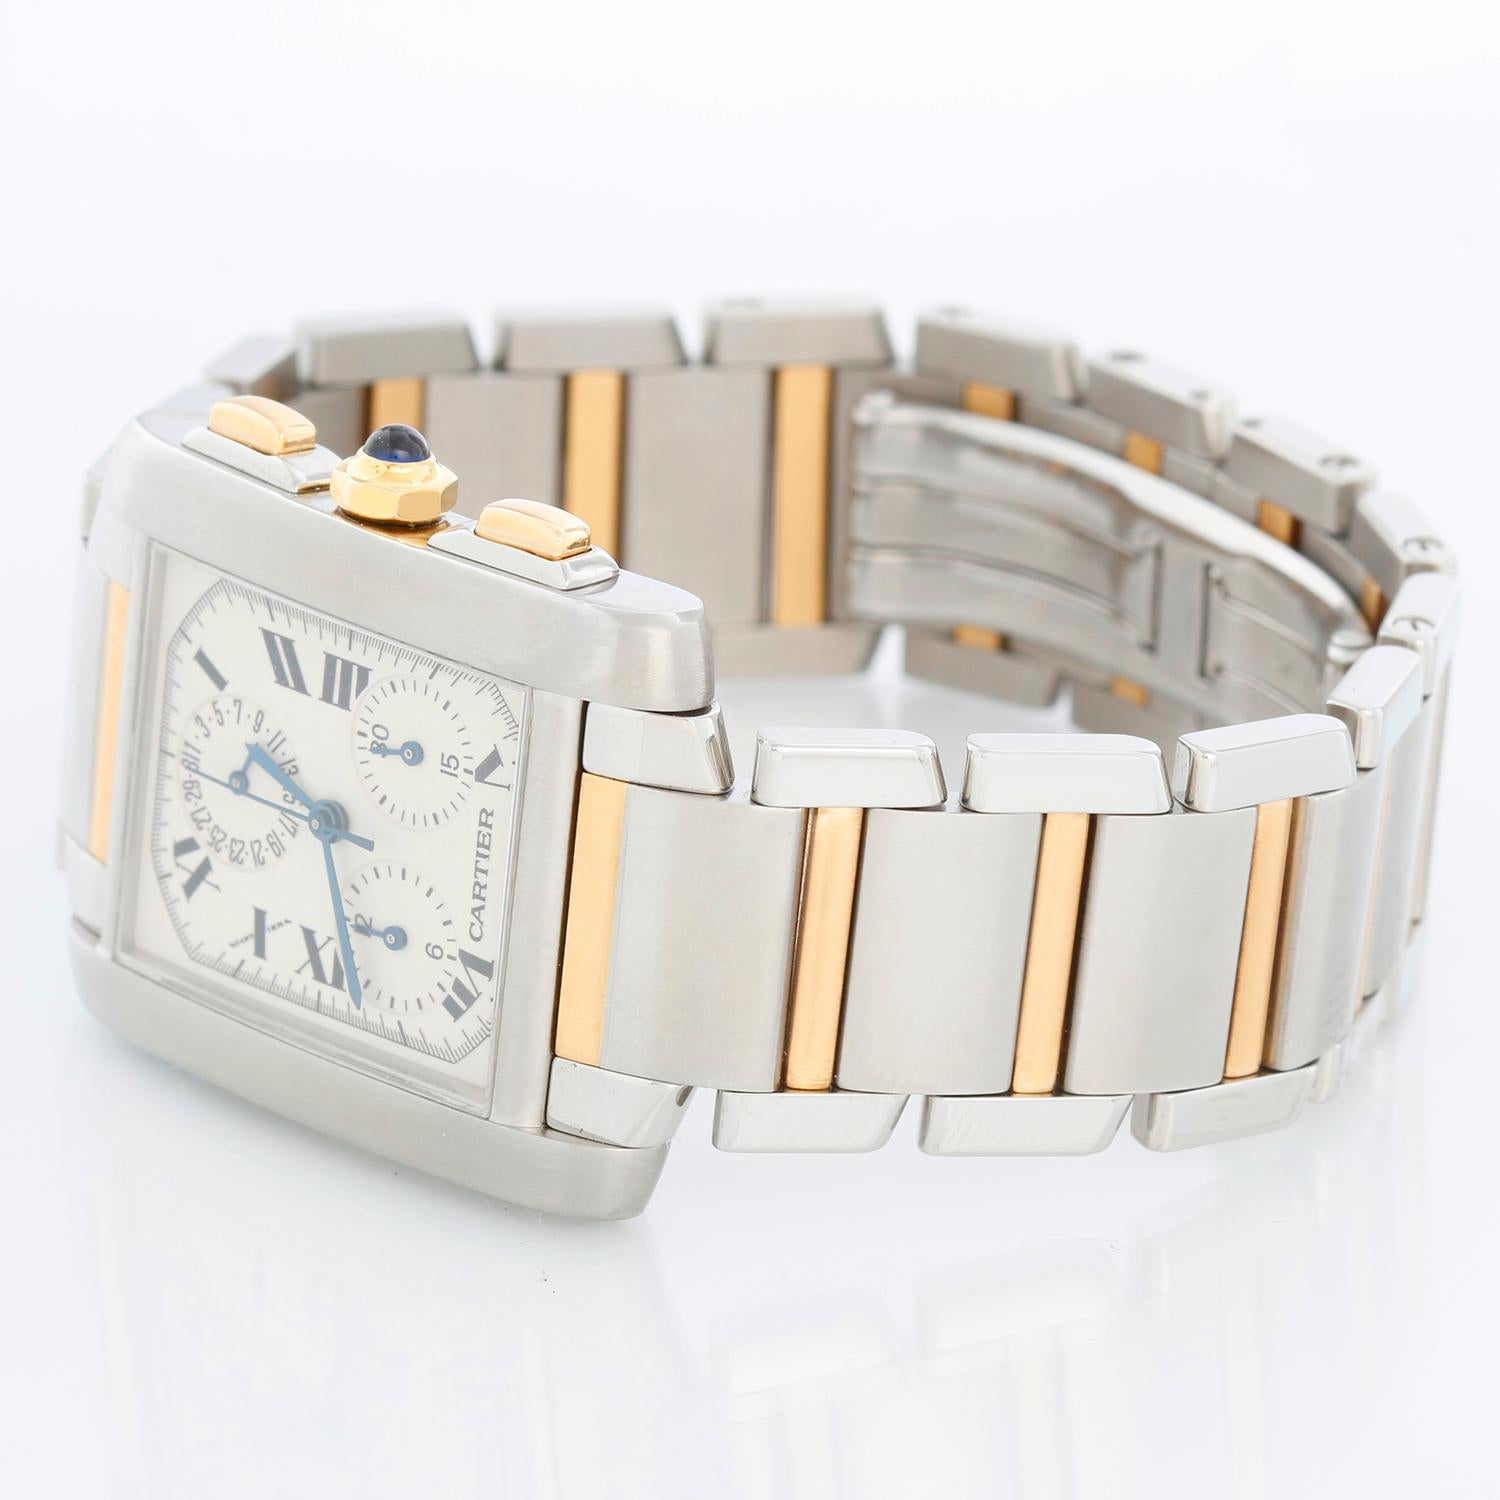 Cartier Tank Francaise Chronograph Men's Steel & Gold Watch  - Quartz. Stainless steel case; crown set with blue sapphire cabochon (28mm x 37mm). Ivory colored dial with black Roman numerals. Stainless steel & 18k gold Cartier bracelet. Pre-owned